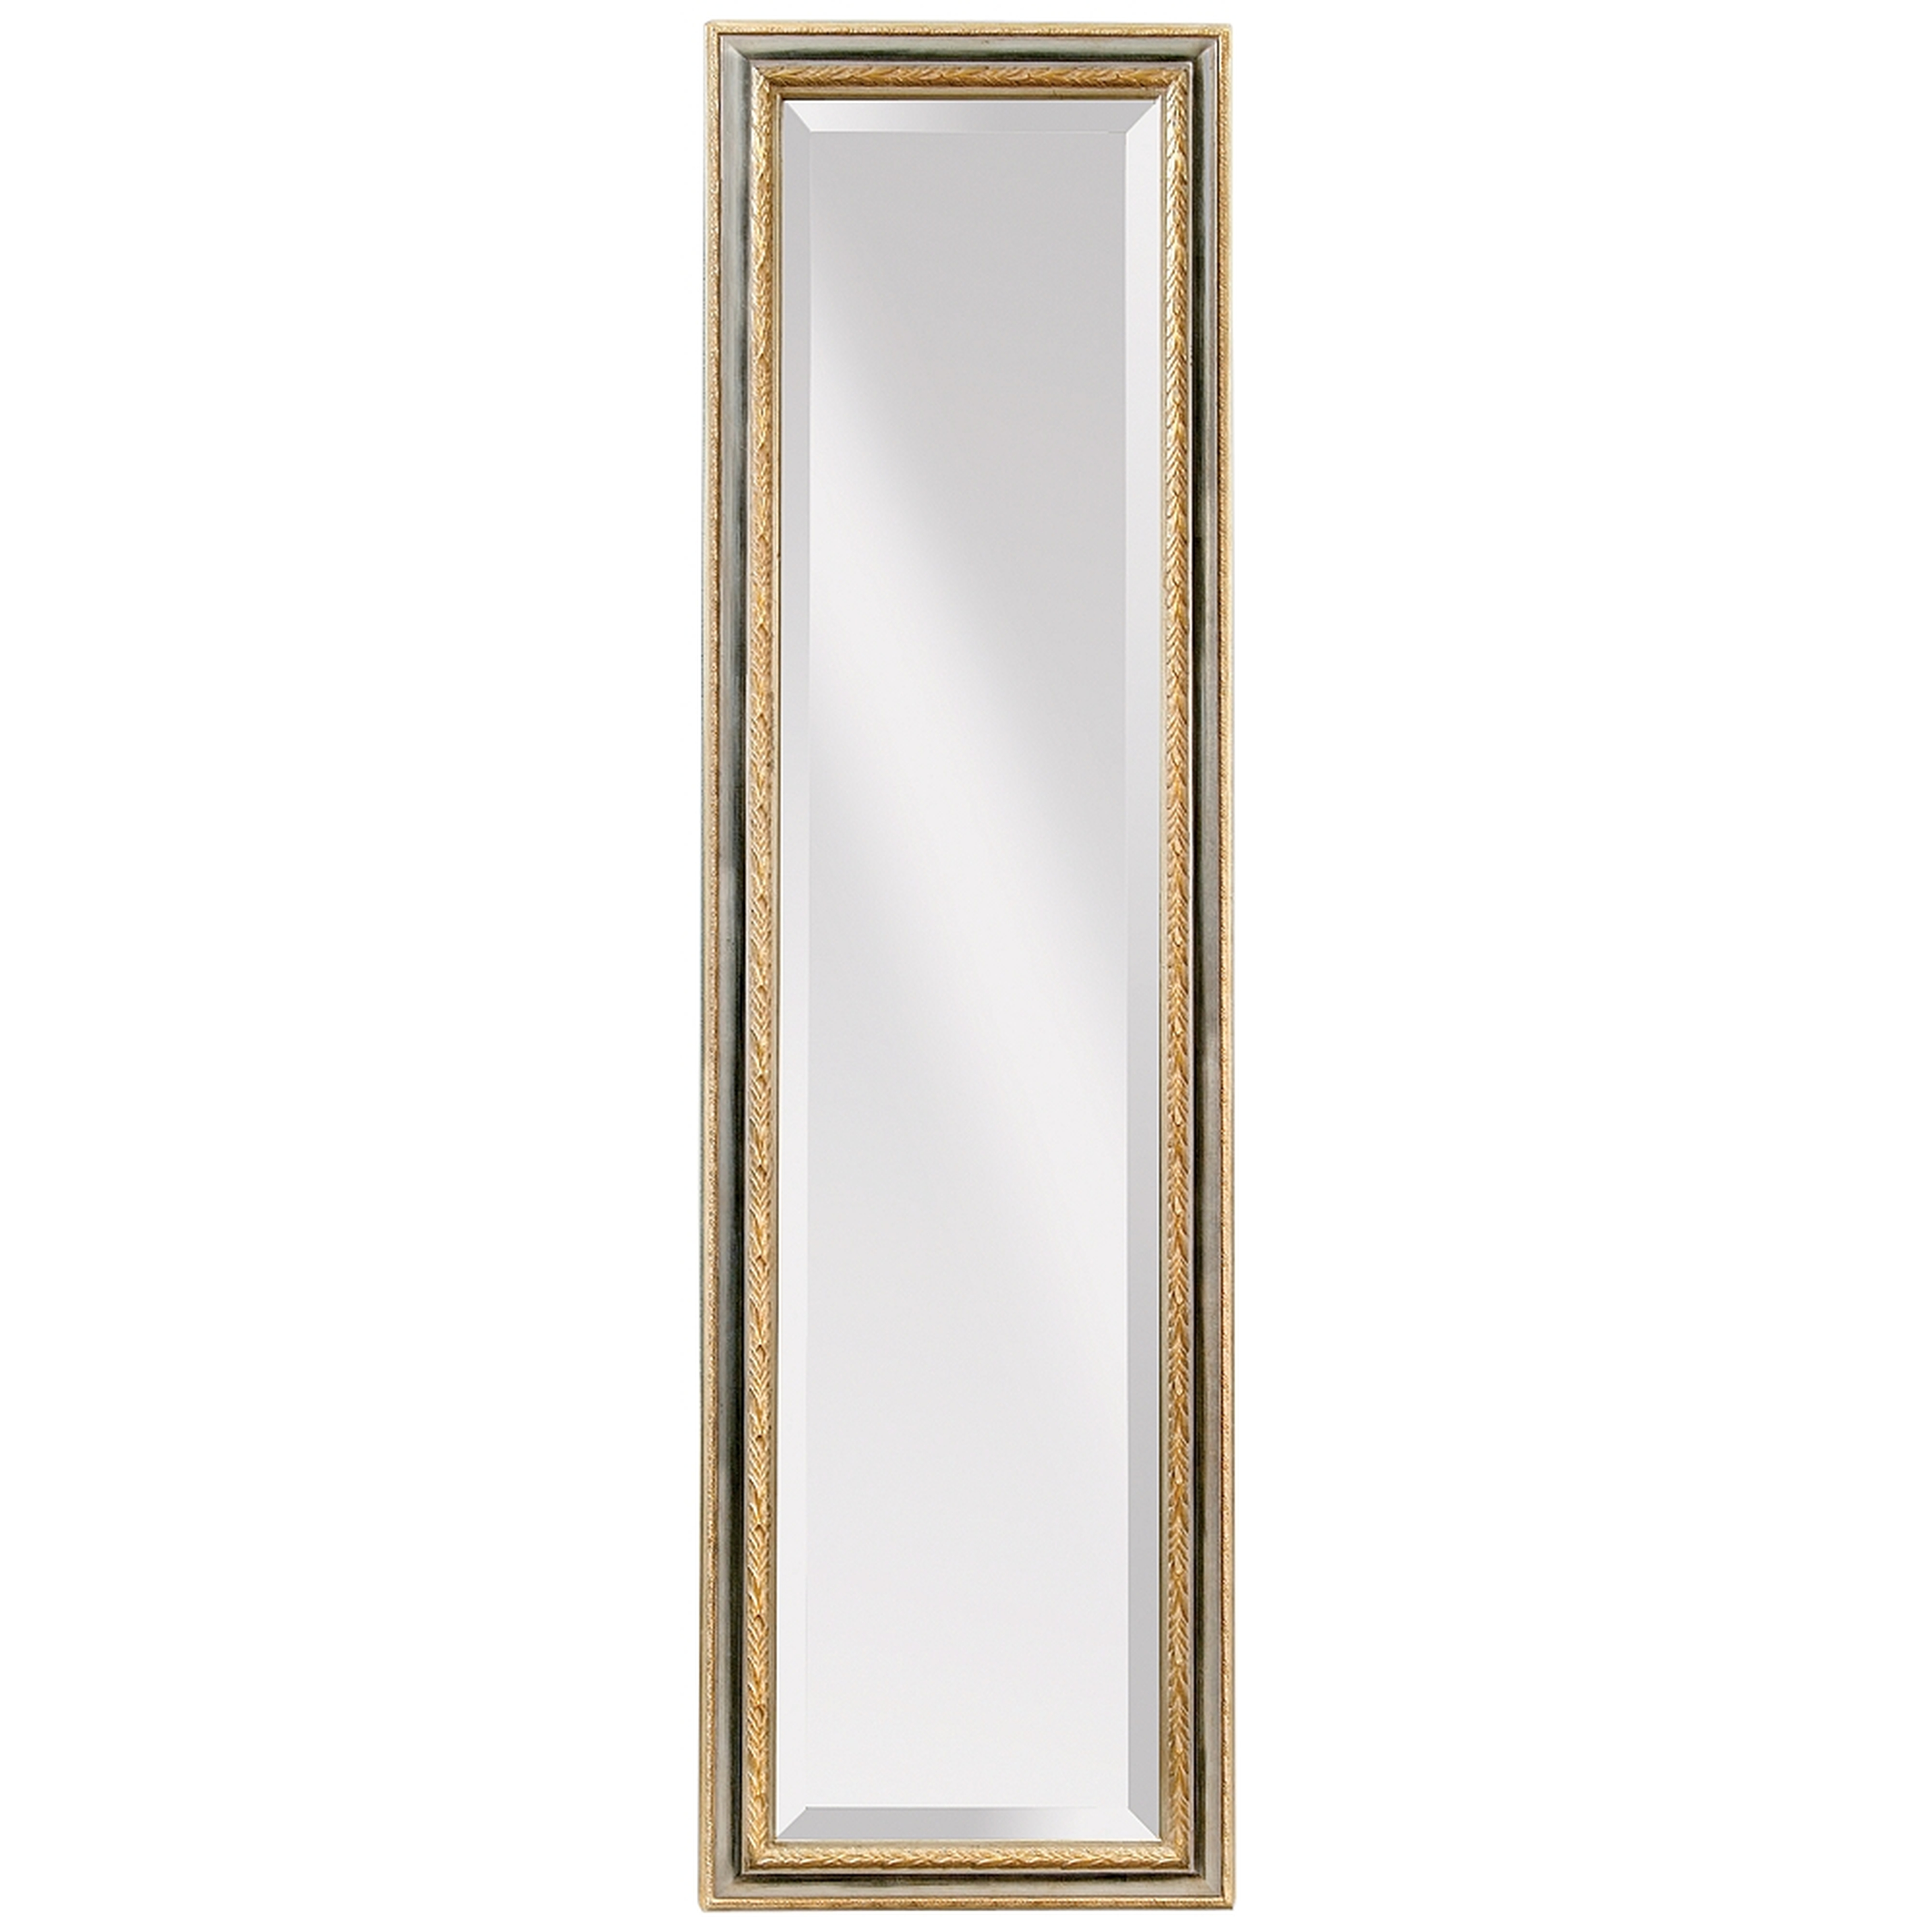 Regis Cheval Silver and Gold 18" x 64" Wall Mirror - Style # 377E0 - Lamps Plus